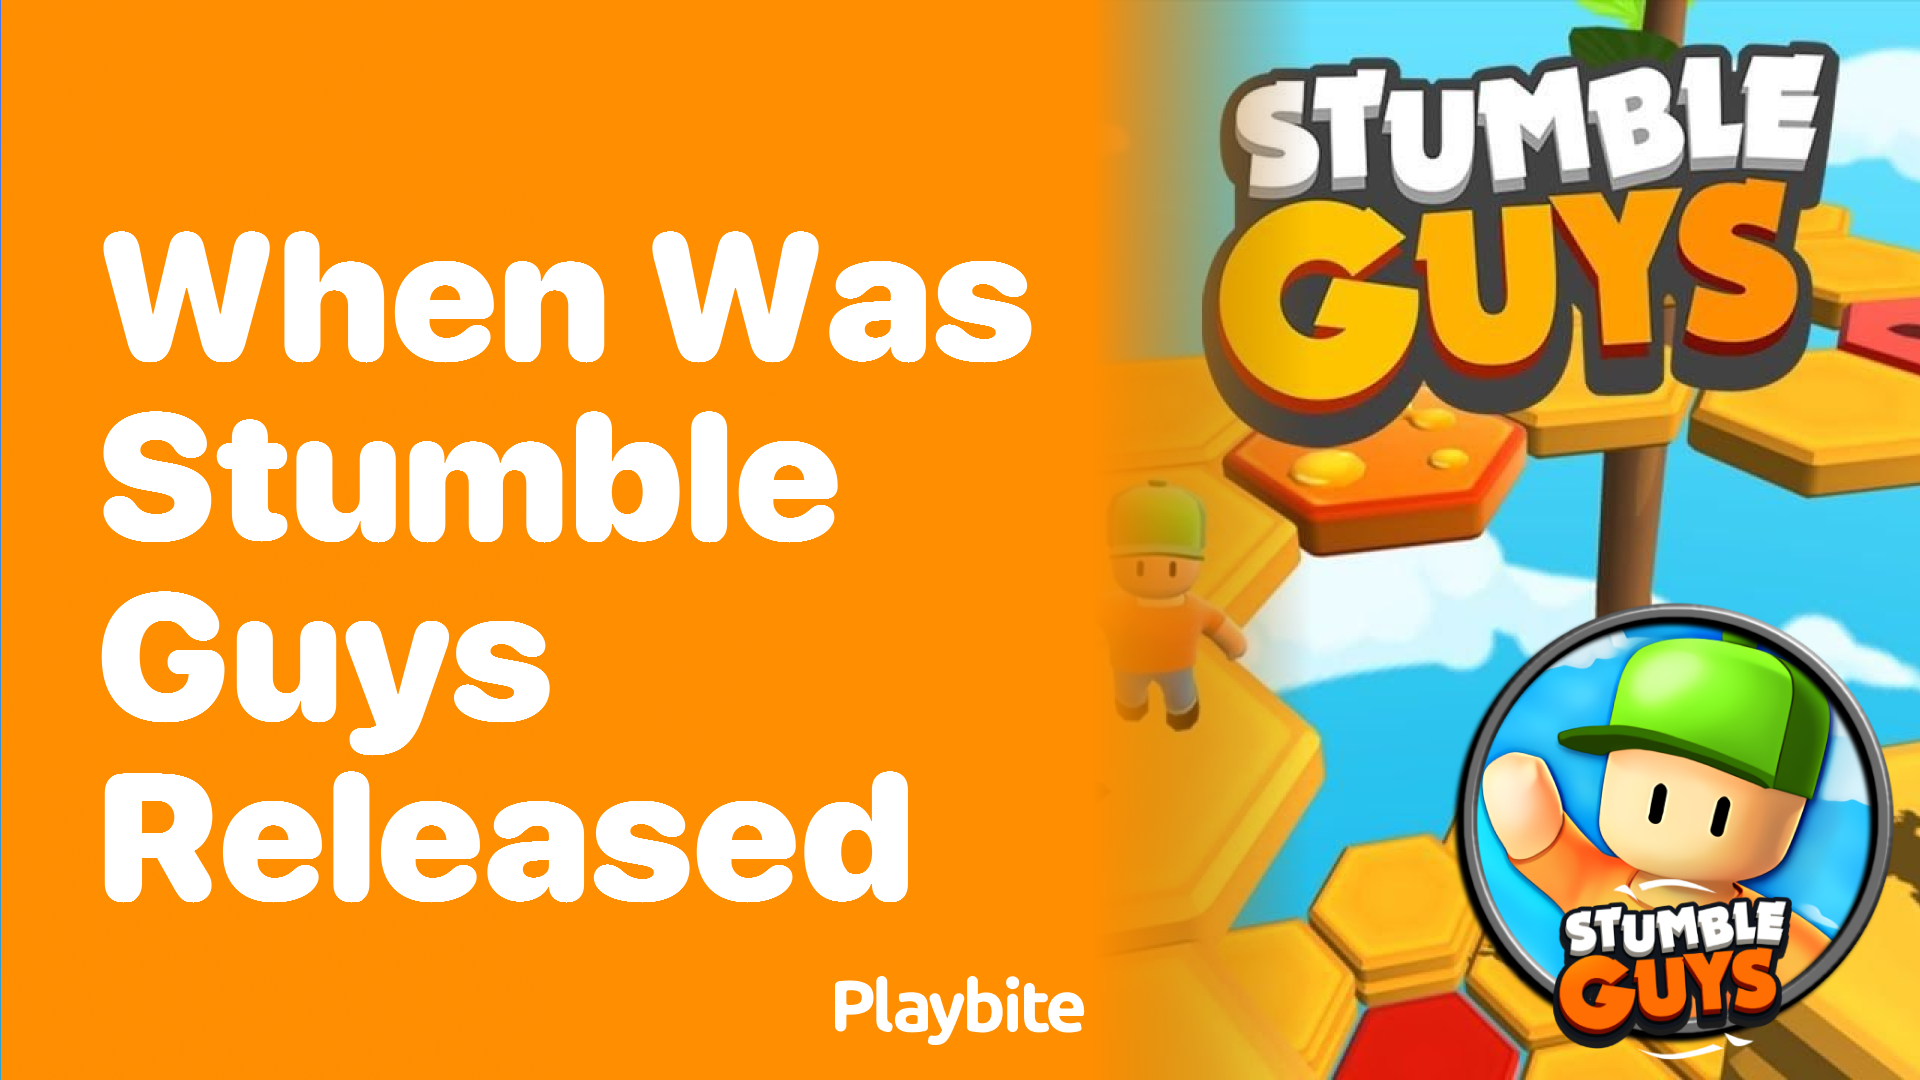 When did Stumble Guys come out? Release Details